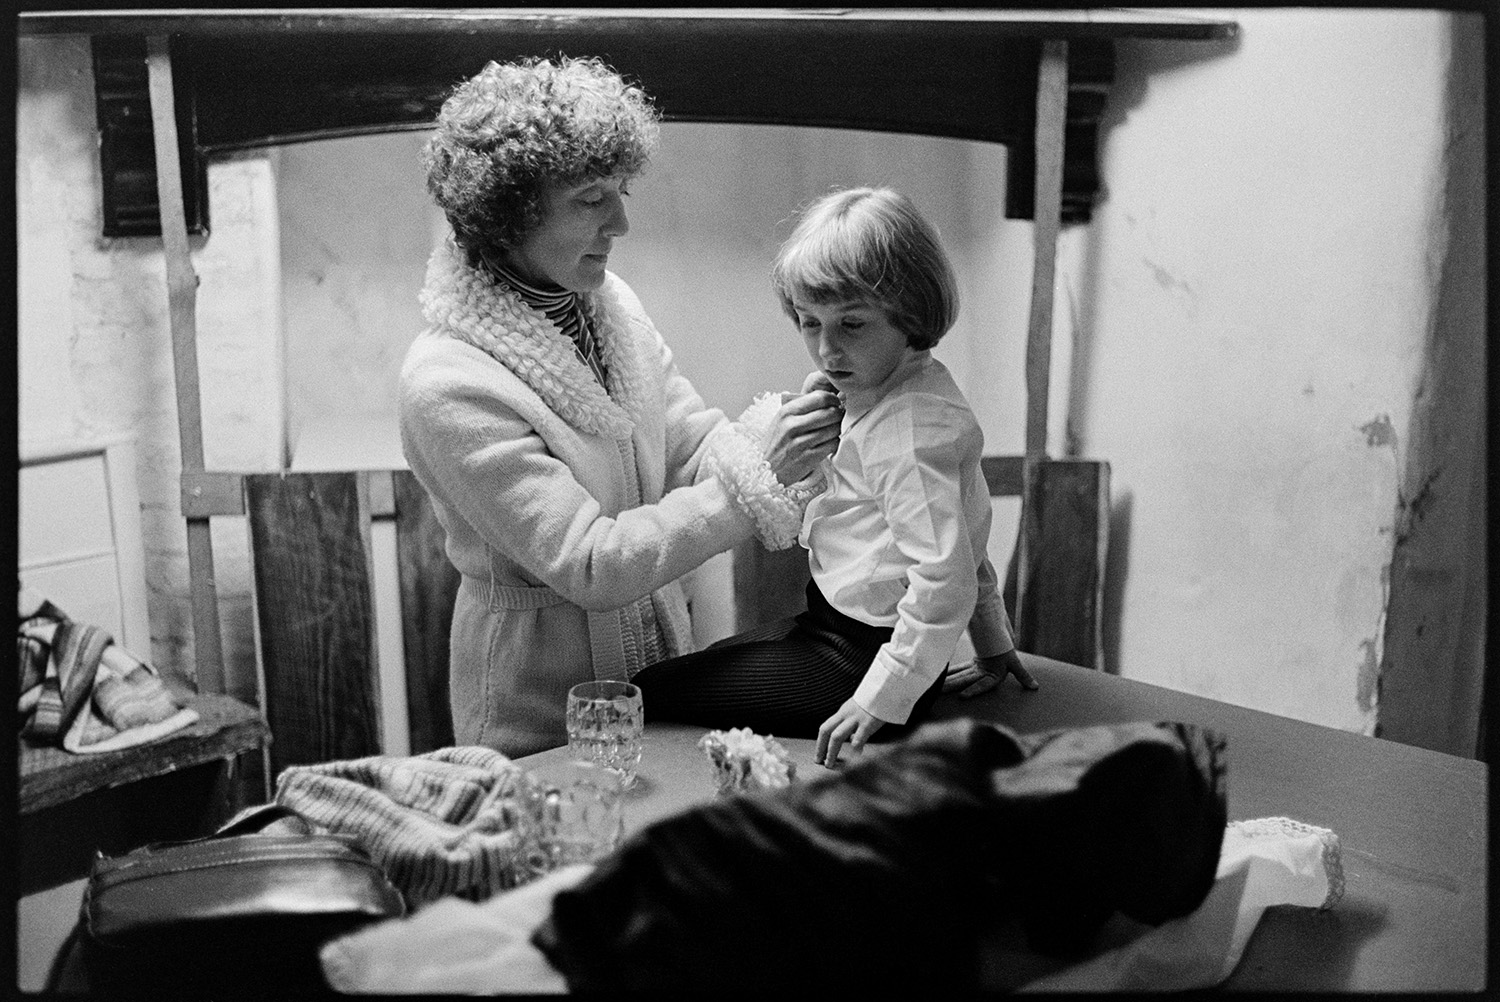 A woman dressing a child sat on a table, possibly for Hatherleigh Carnival.